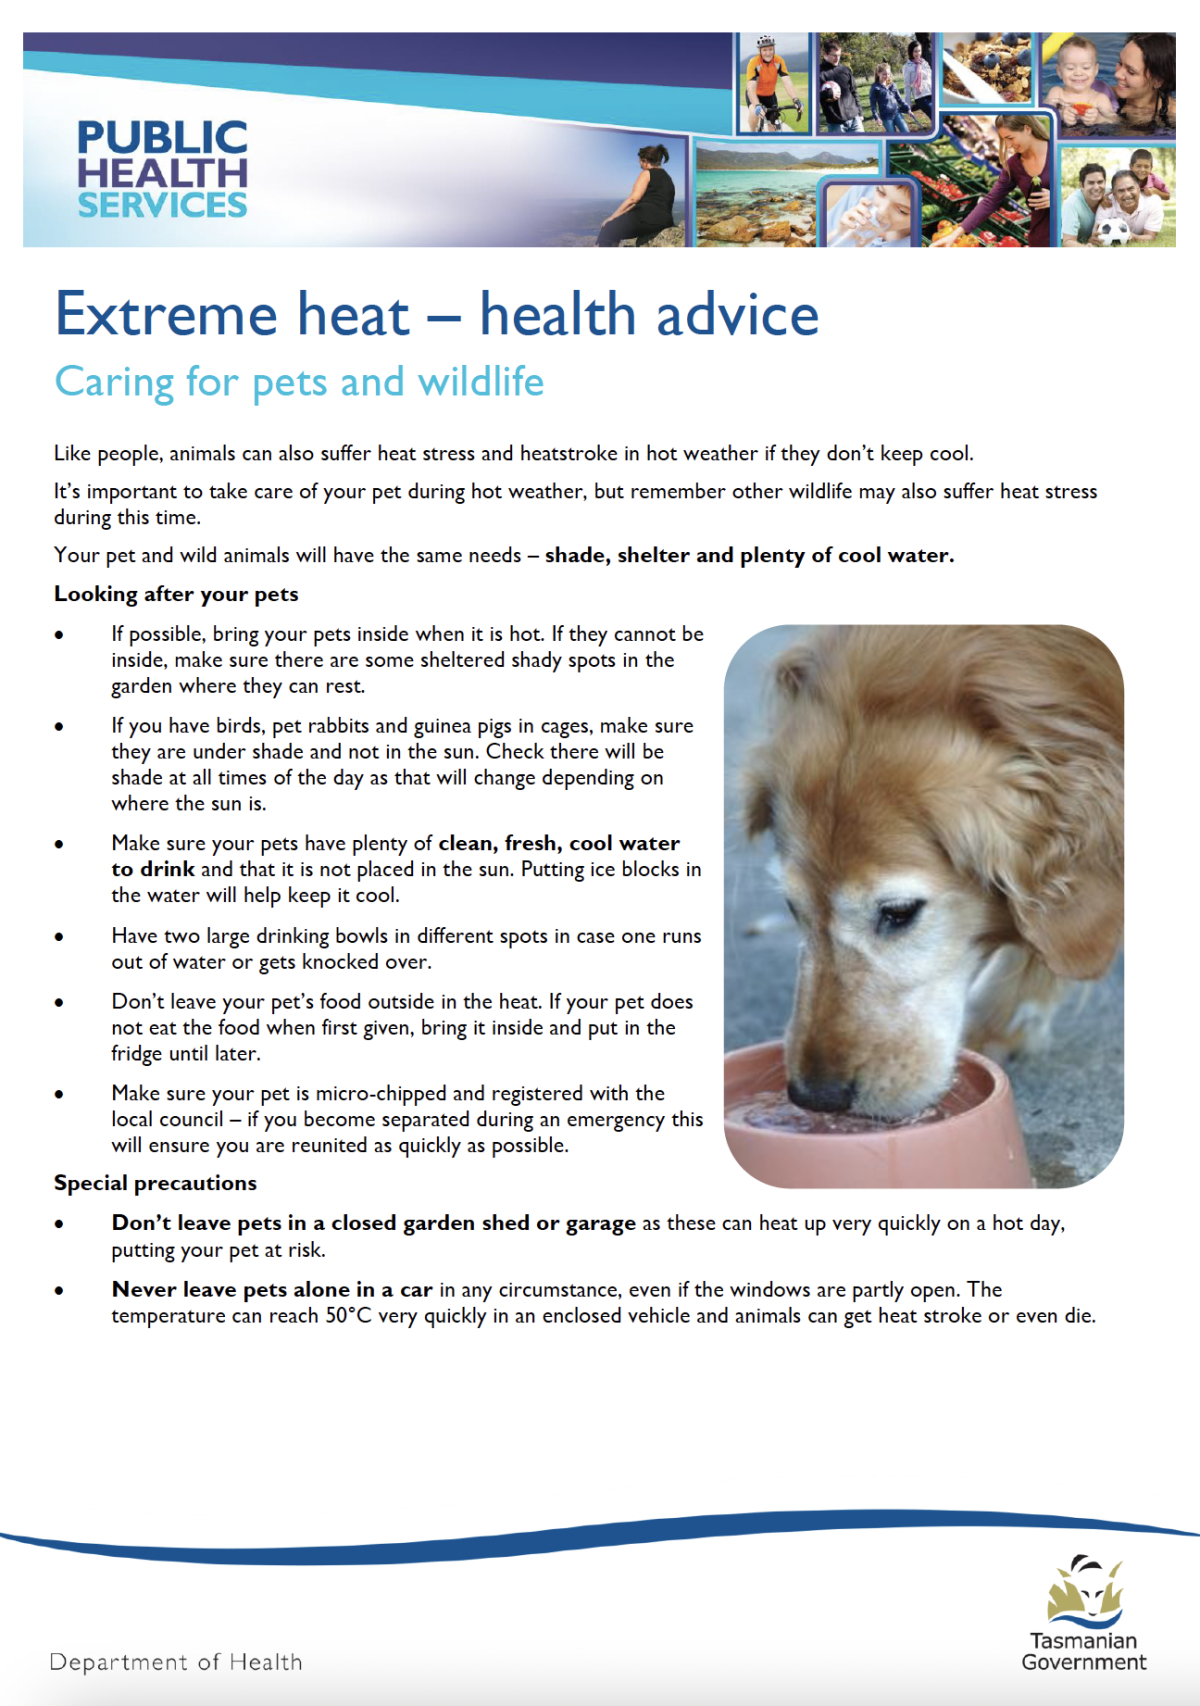 Caring for pets and wildlife during extreme heat | Tasmanian Department of  Health